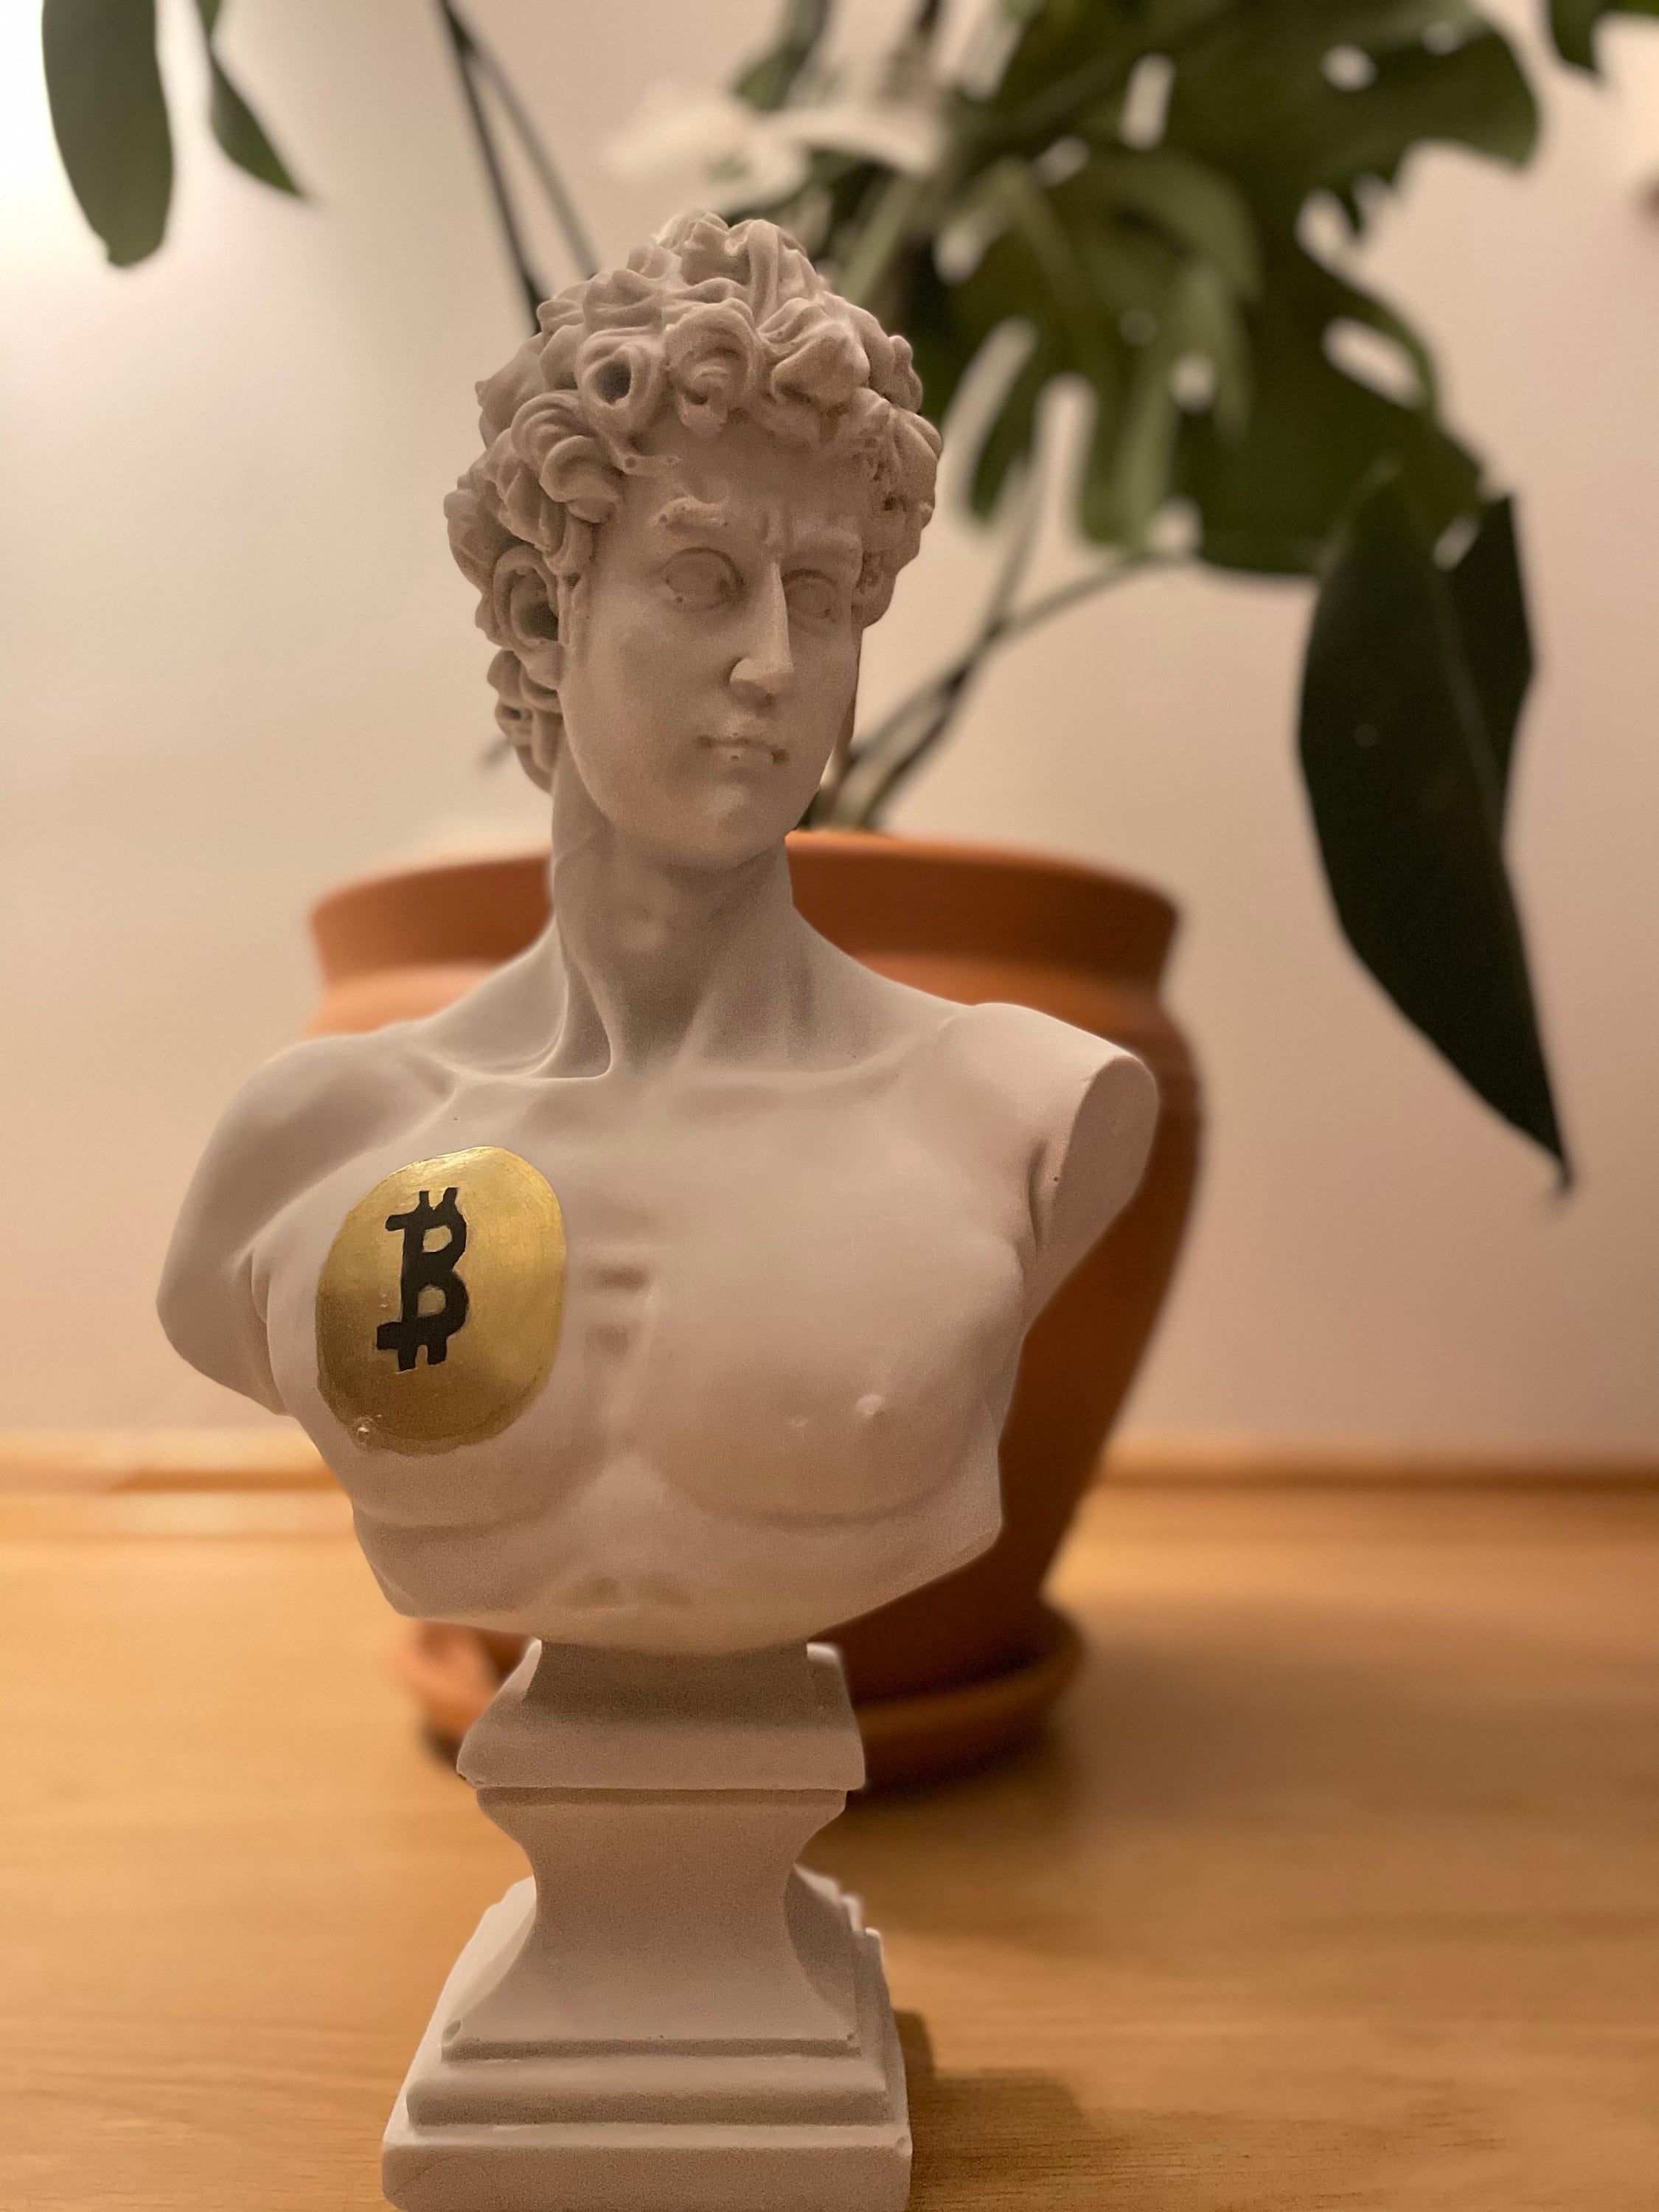 Timeless Opulence: Large David Coin Bust Sculpture in White and Gold